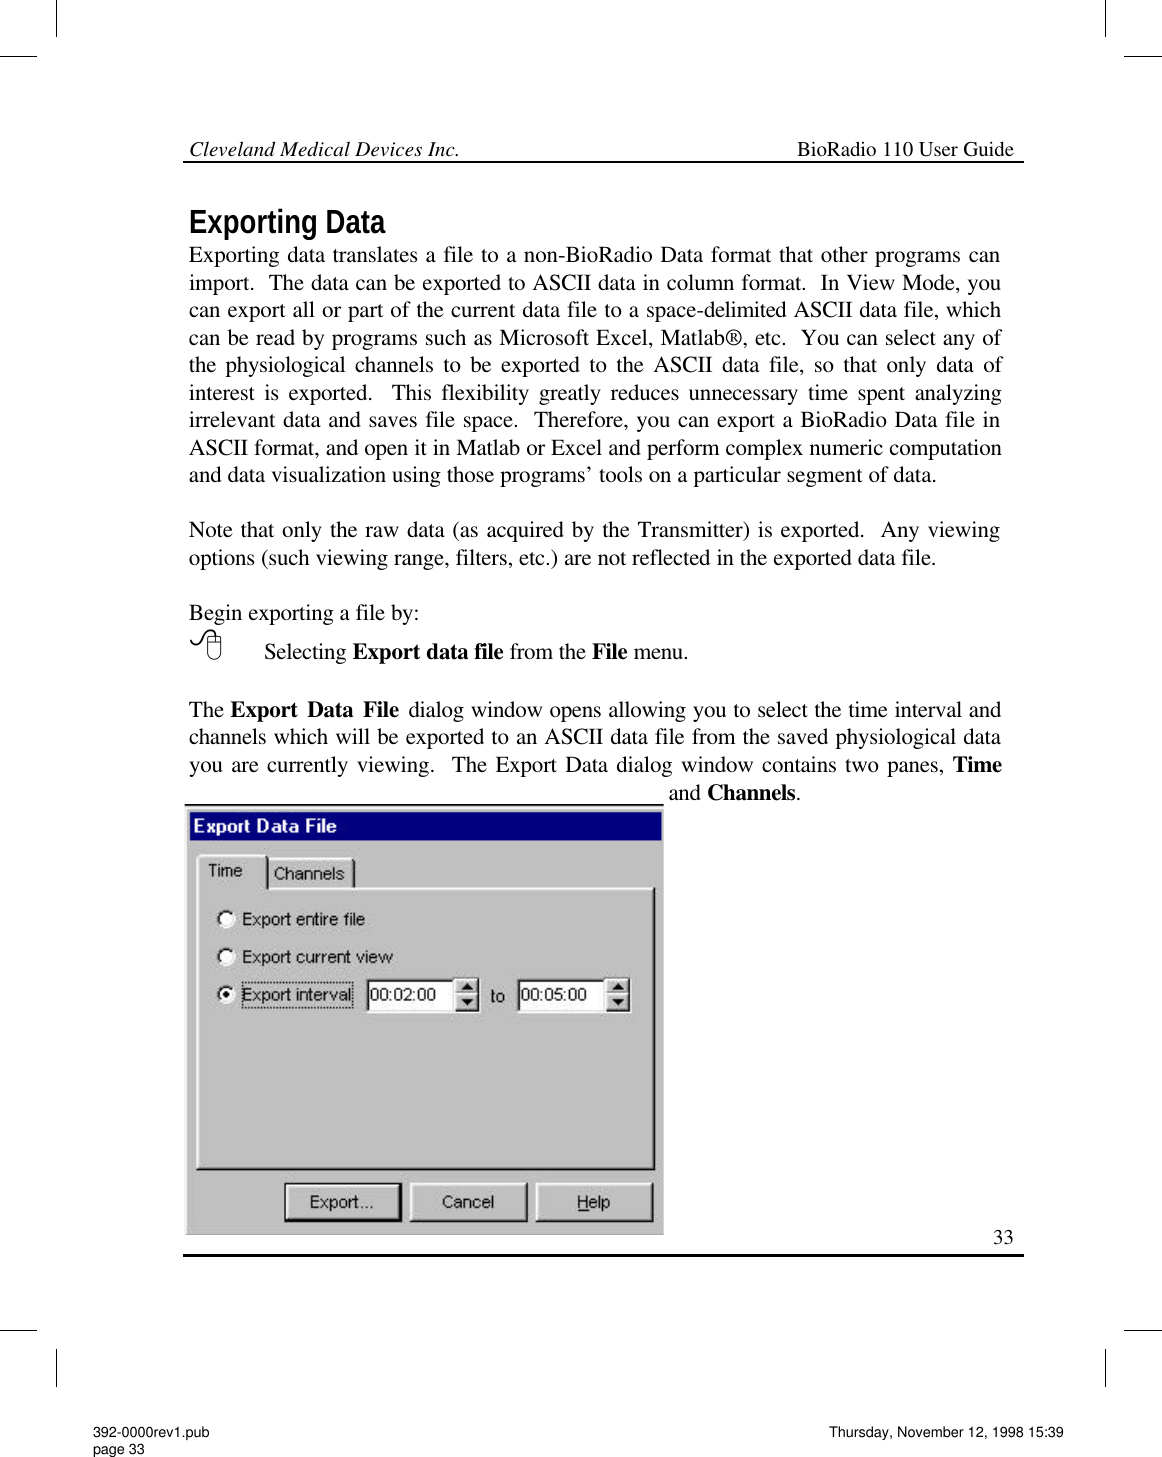 Cleveland Medical Devices Inc.                                                             BioRadio 110 User Guide                                                                                                                                                   33 Exporting Data Exporting data translates a file to a non-BioRadio Data format that other programs can import.  The data can be exported to ASCII data in column format.  In View Mode, you can export all or part of the current data file to a space-delimited ASCII data file, which can be read by programs such as Microsoft Excel, Matlab®, etc.  You can select any of the physiological channels to be exported to the ASCII data file, so that only data of interest is exported.  This flexibility greatly reduces unnecessary time spent analyzing irrelevant data and saves file space.  Therefore, you can export a BioRadio Data file in ASCII format, and open it in Matlab or Excel and perform complex numeric computation and data visualization using those programs’ tools on a particular segment of data.  Note that only the raw data (as acquired by the Transmitter) is exported.  Any viewing options (such viewing range, filters, etc.) are not reflected in the exported data file.  Begin exporting a file by: 8 Selecting Export data file from the File menu.  The Export Data File dialog window opens allowing you to select the time interval and channels which will be exported to an ASCII data file from the saved physiological data you are currently viewing.  The Export Data dialog window contains two panes, Time and Channels.  392-0000rev1.pub page 33 Thursday, November 12, 1998 15:39 